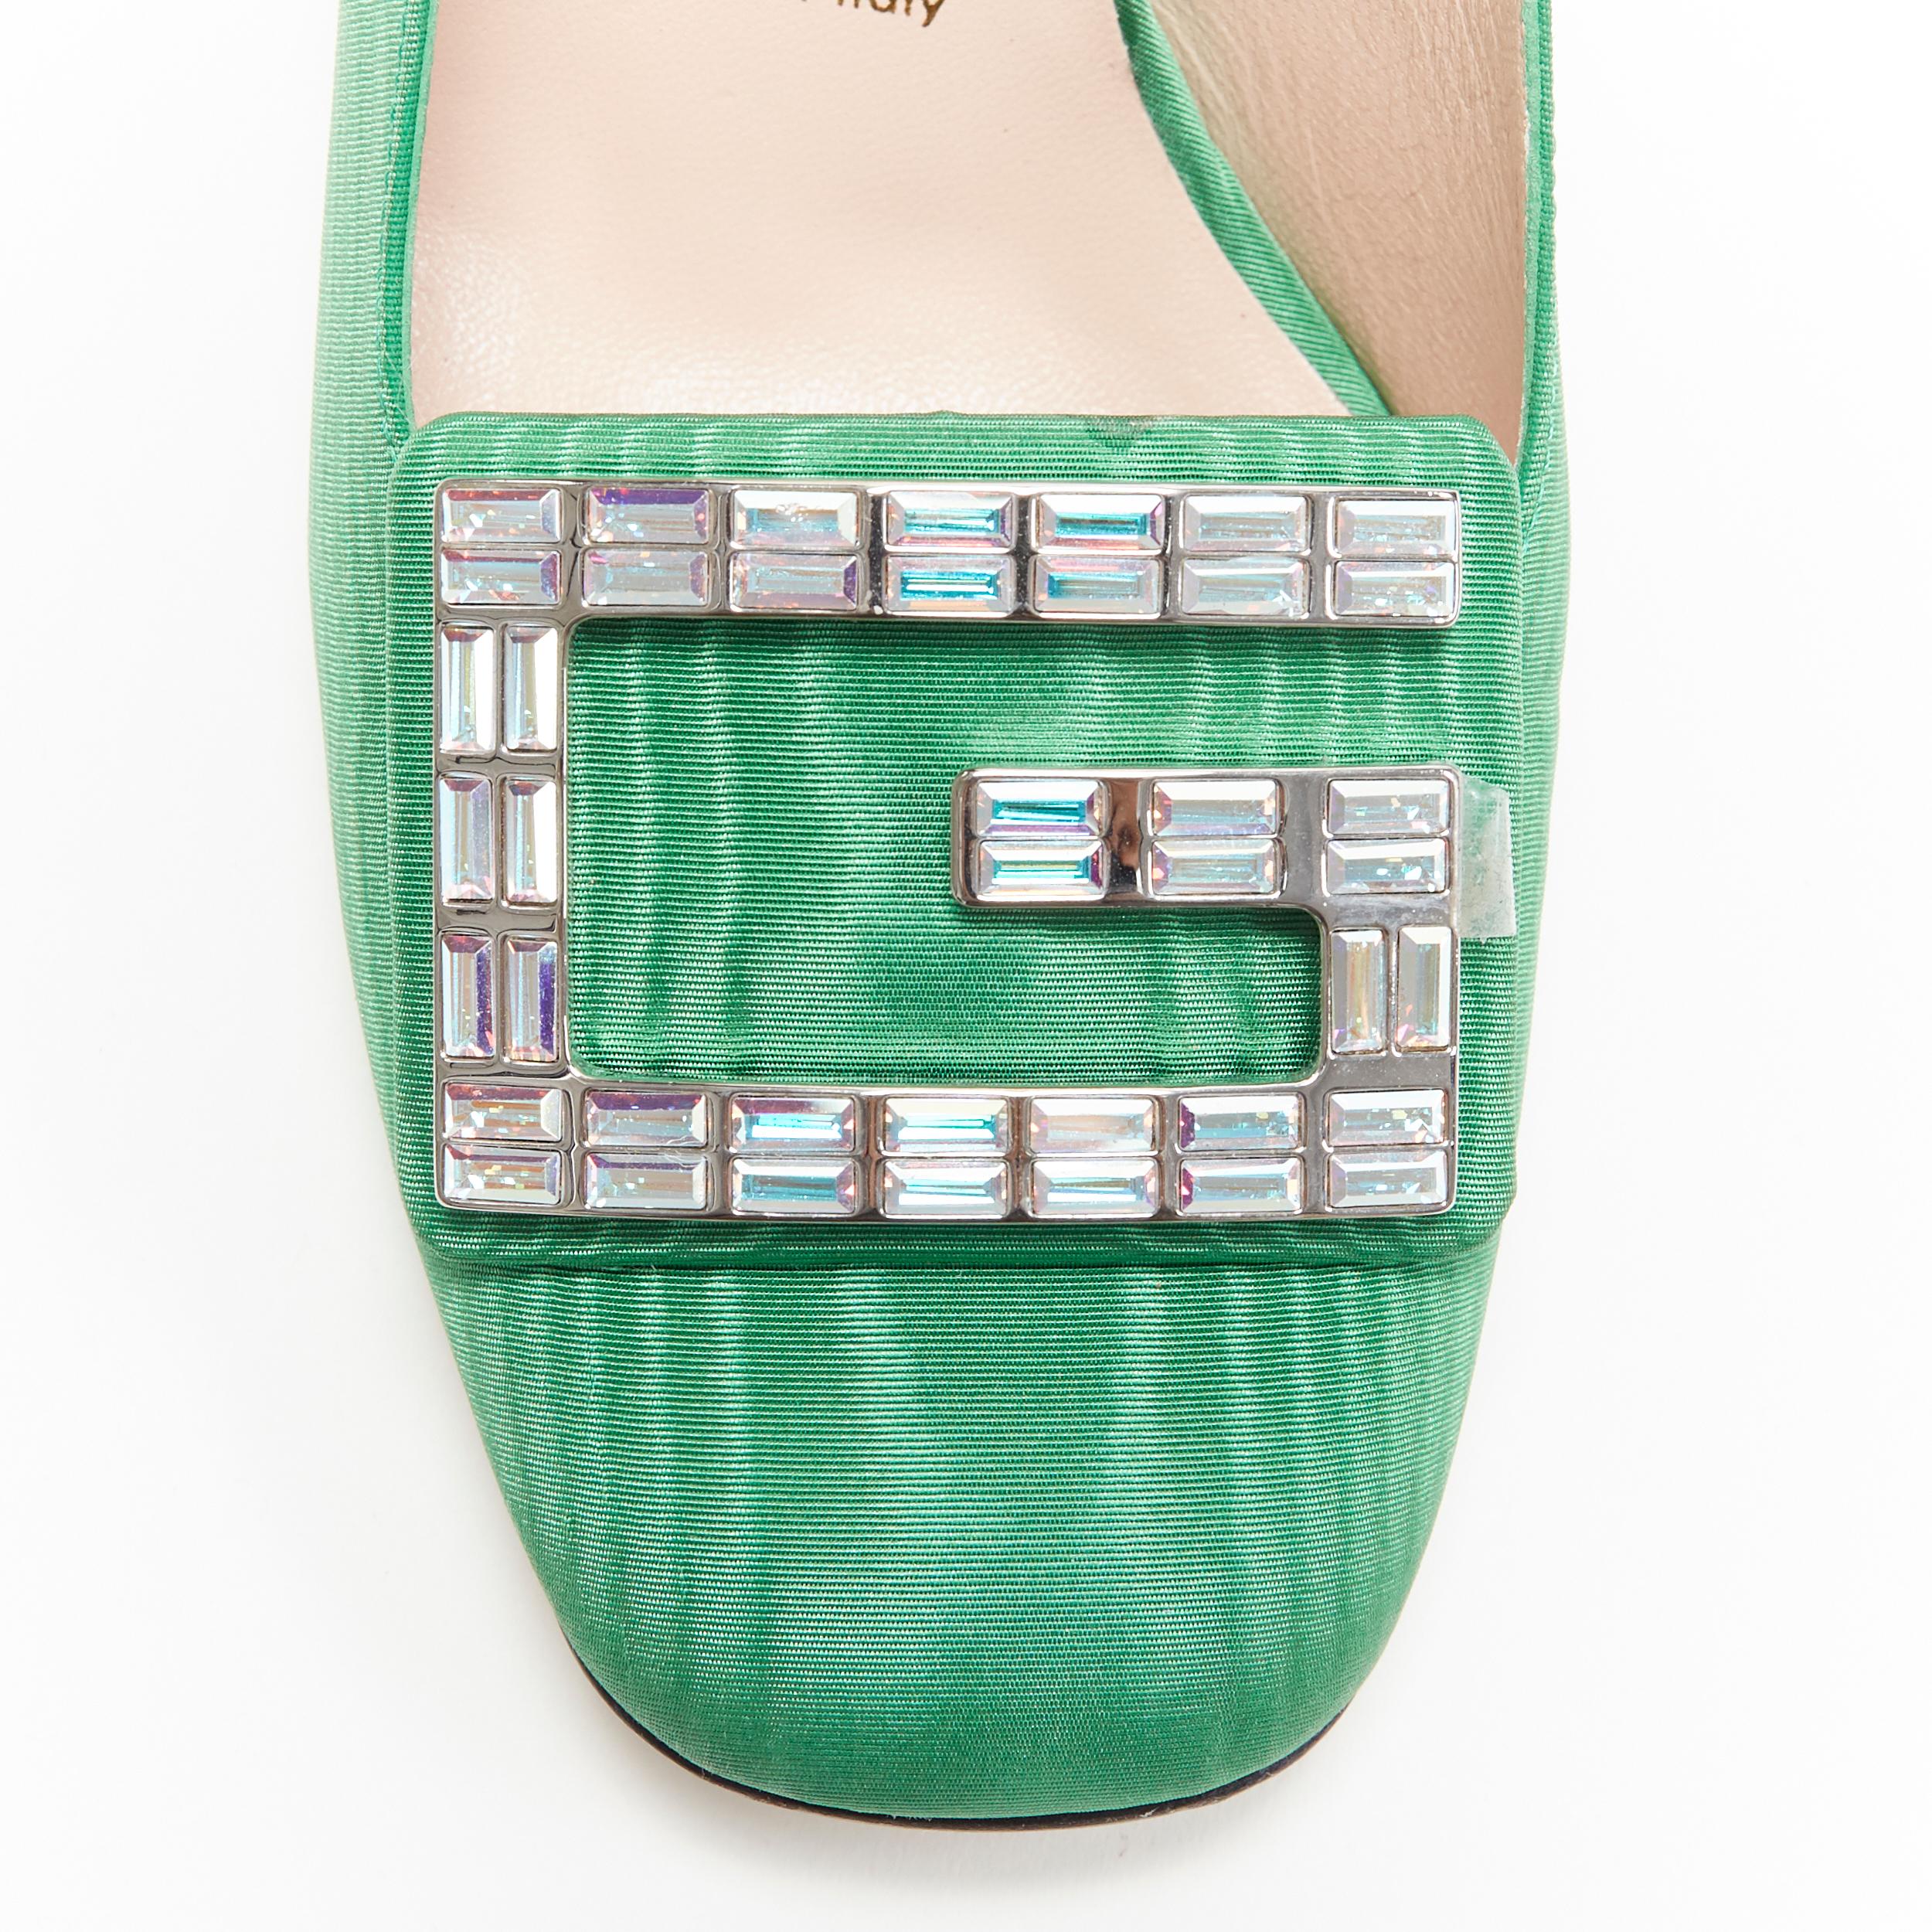 GUCCI Madelyn Moire green crystal embellished G buckle slingback mid heel EU36
Brand: Gucci
Designer: Alessandro Michele
Collection: 2020
Model Name / Style: Madelyn Moire heel
Material: Silk
Color: Green
Pattern: Solid
Closure: Sling back
Lining